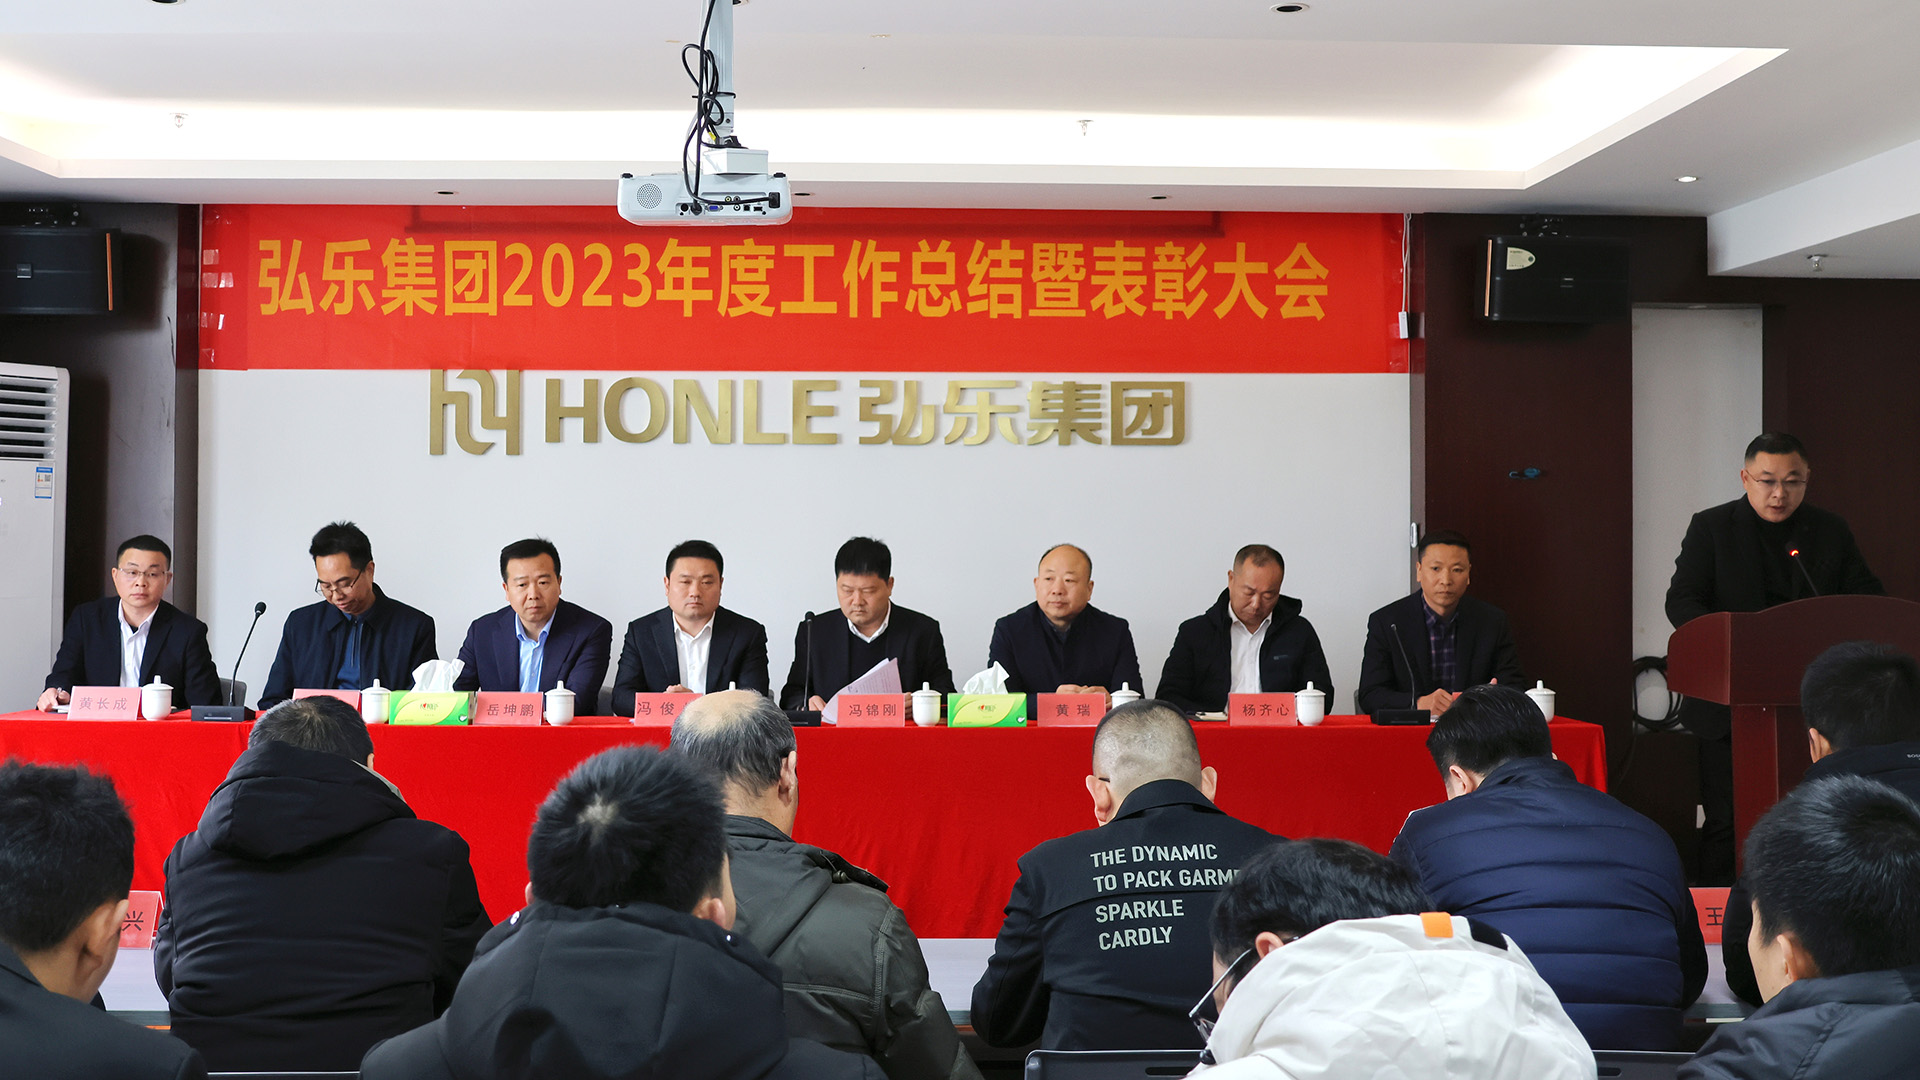 Honle Group held the 2023 annual summary and commendation meeting